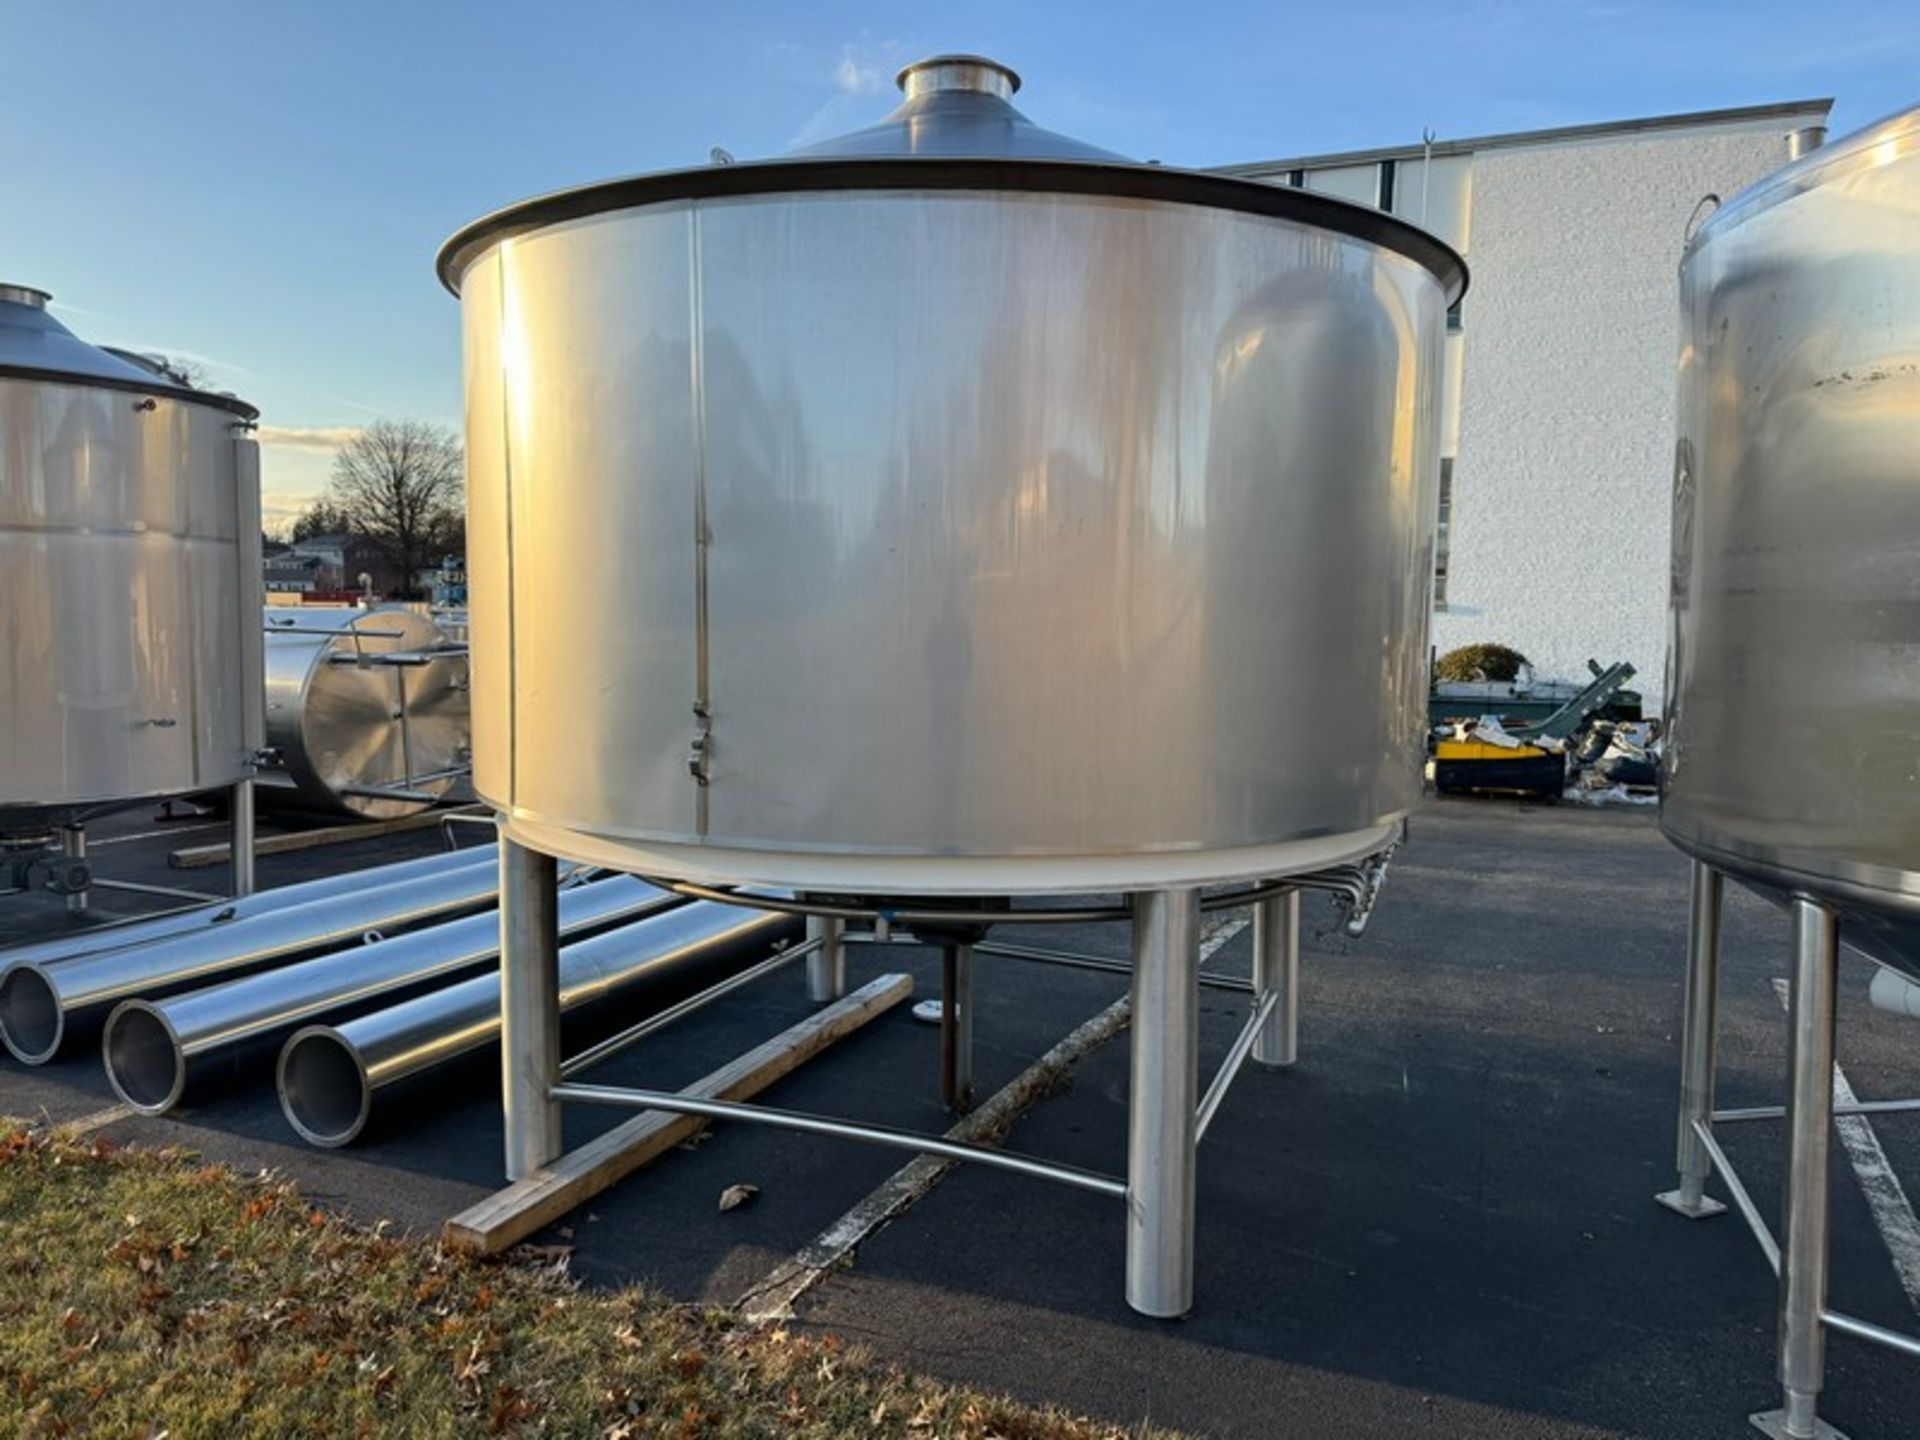 2012 Specific Mechanical Systems 45 BBL Capacity S/S Lauter Tun Tank, S/N RMP-136-12, with Legs, - Image 6 of 16